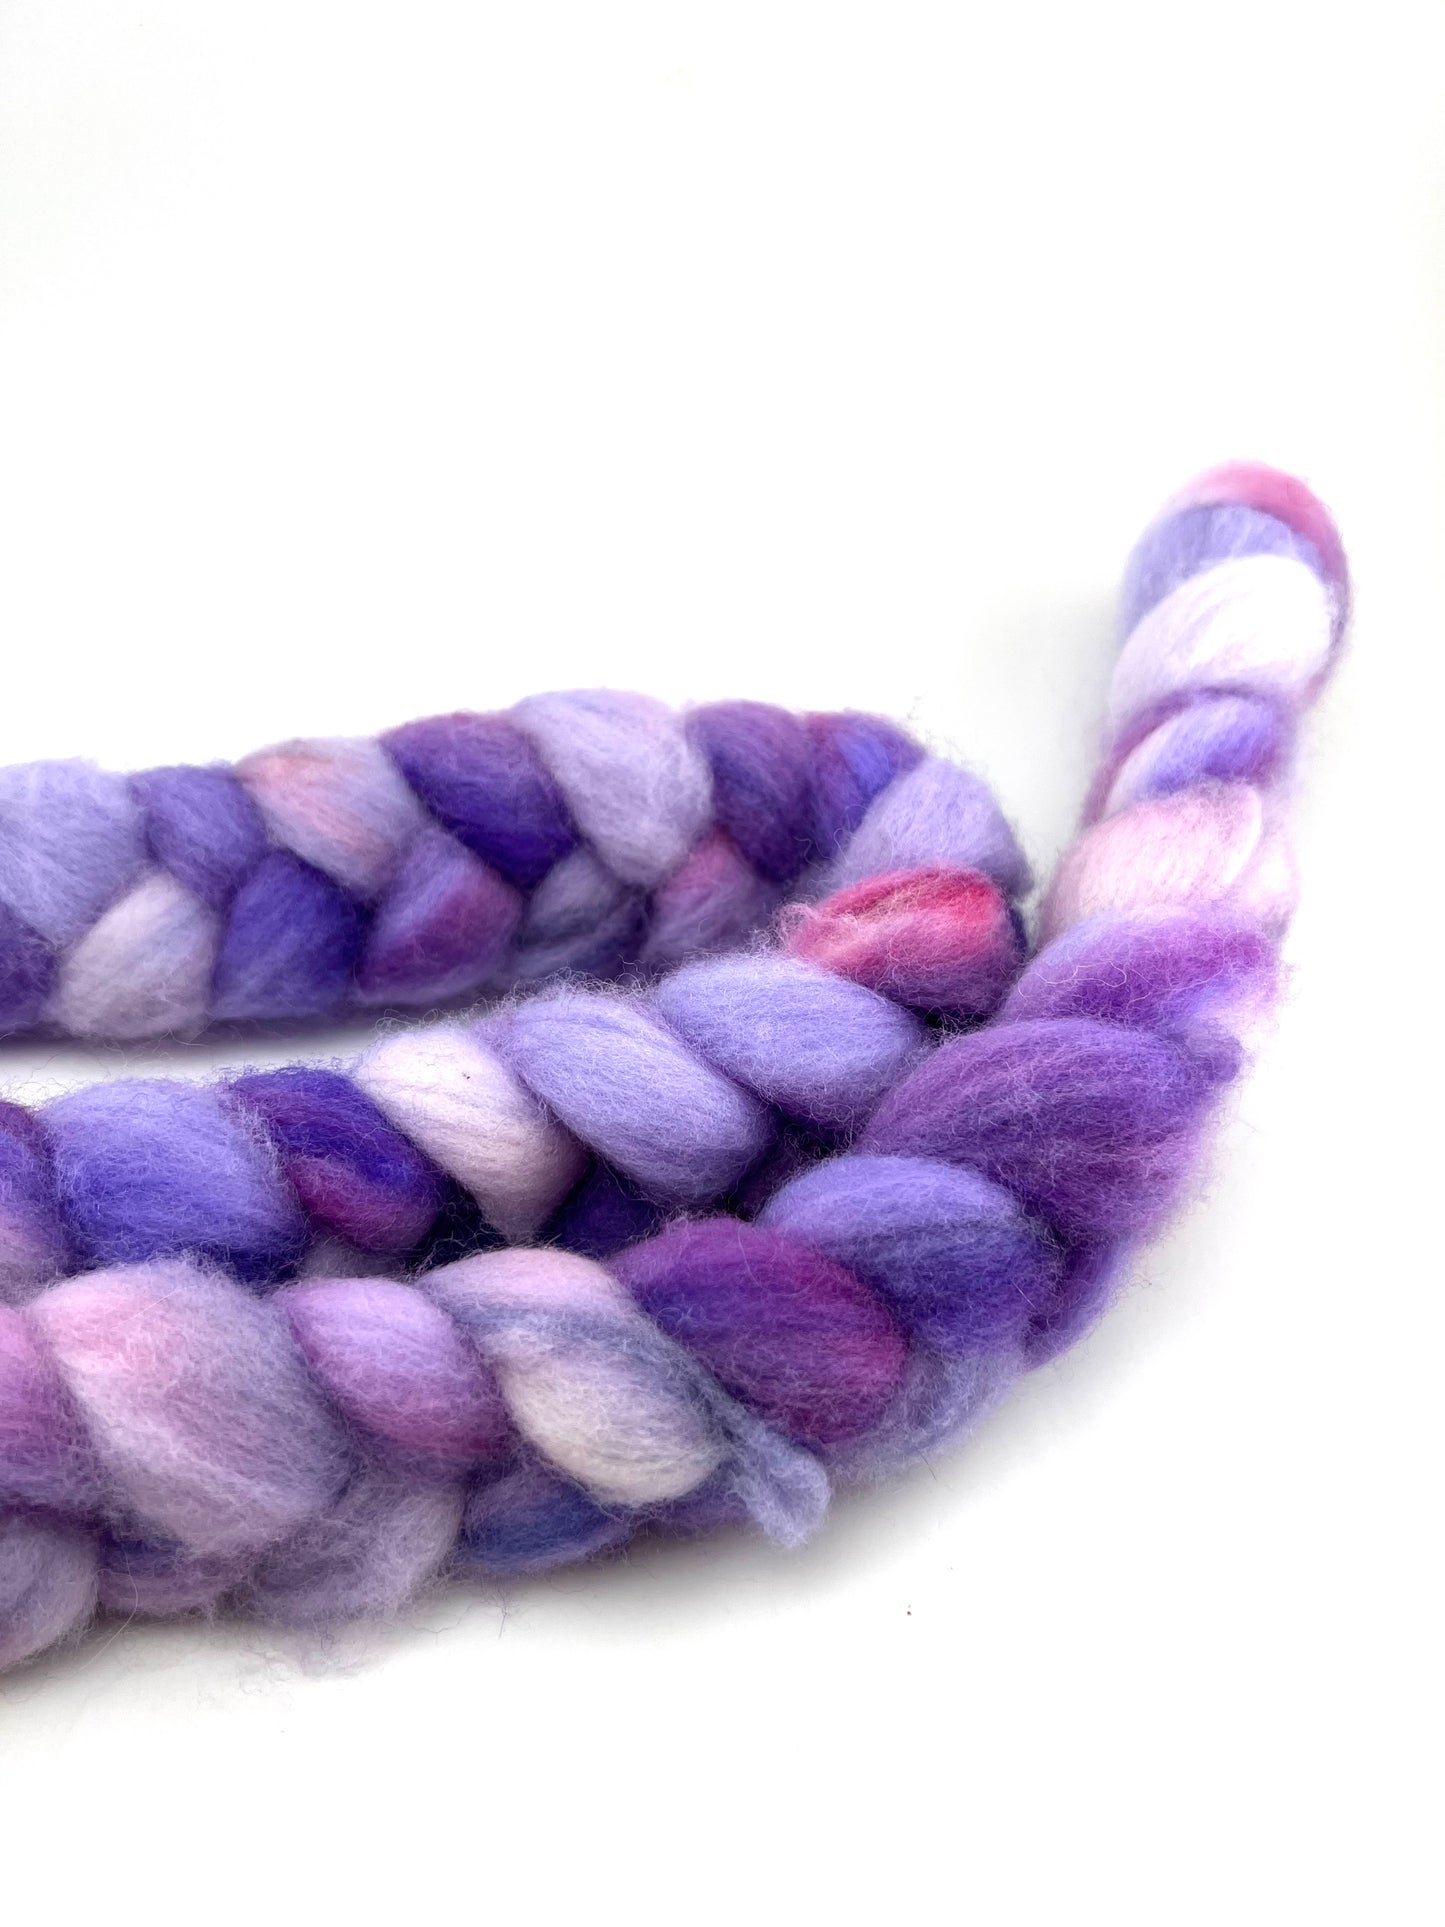 PURPLE PEOPLE EATER Hand Dyed Spinning Fibre Purples Polwarth Top Non Superwash